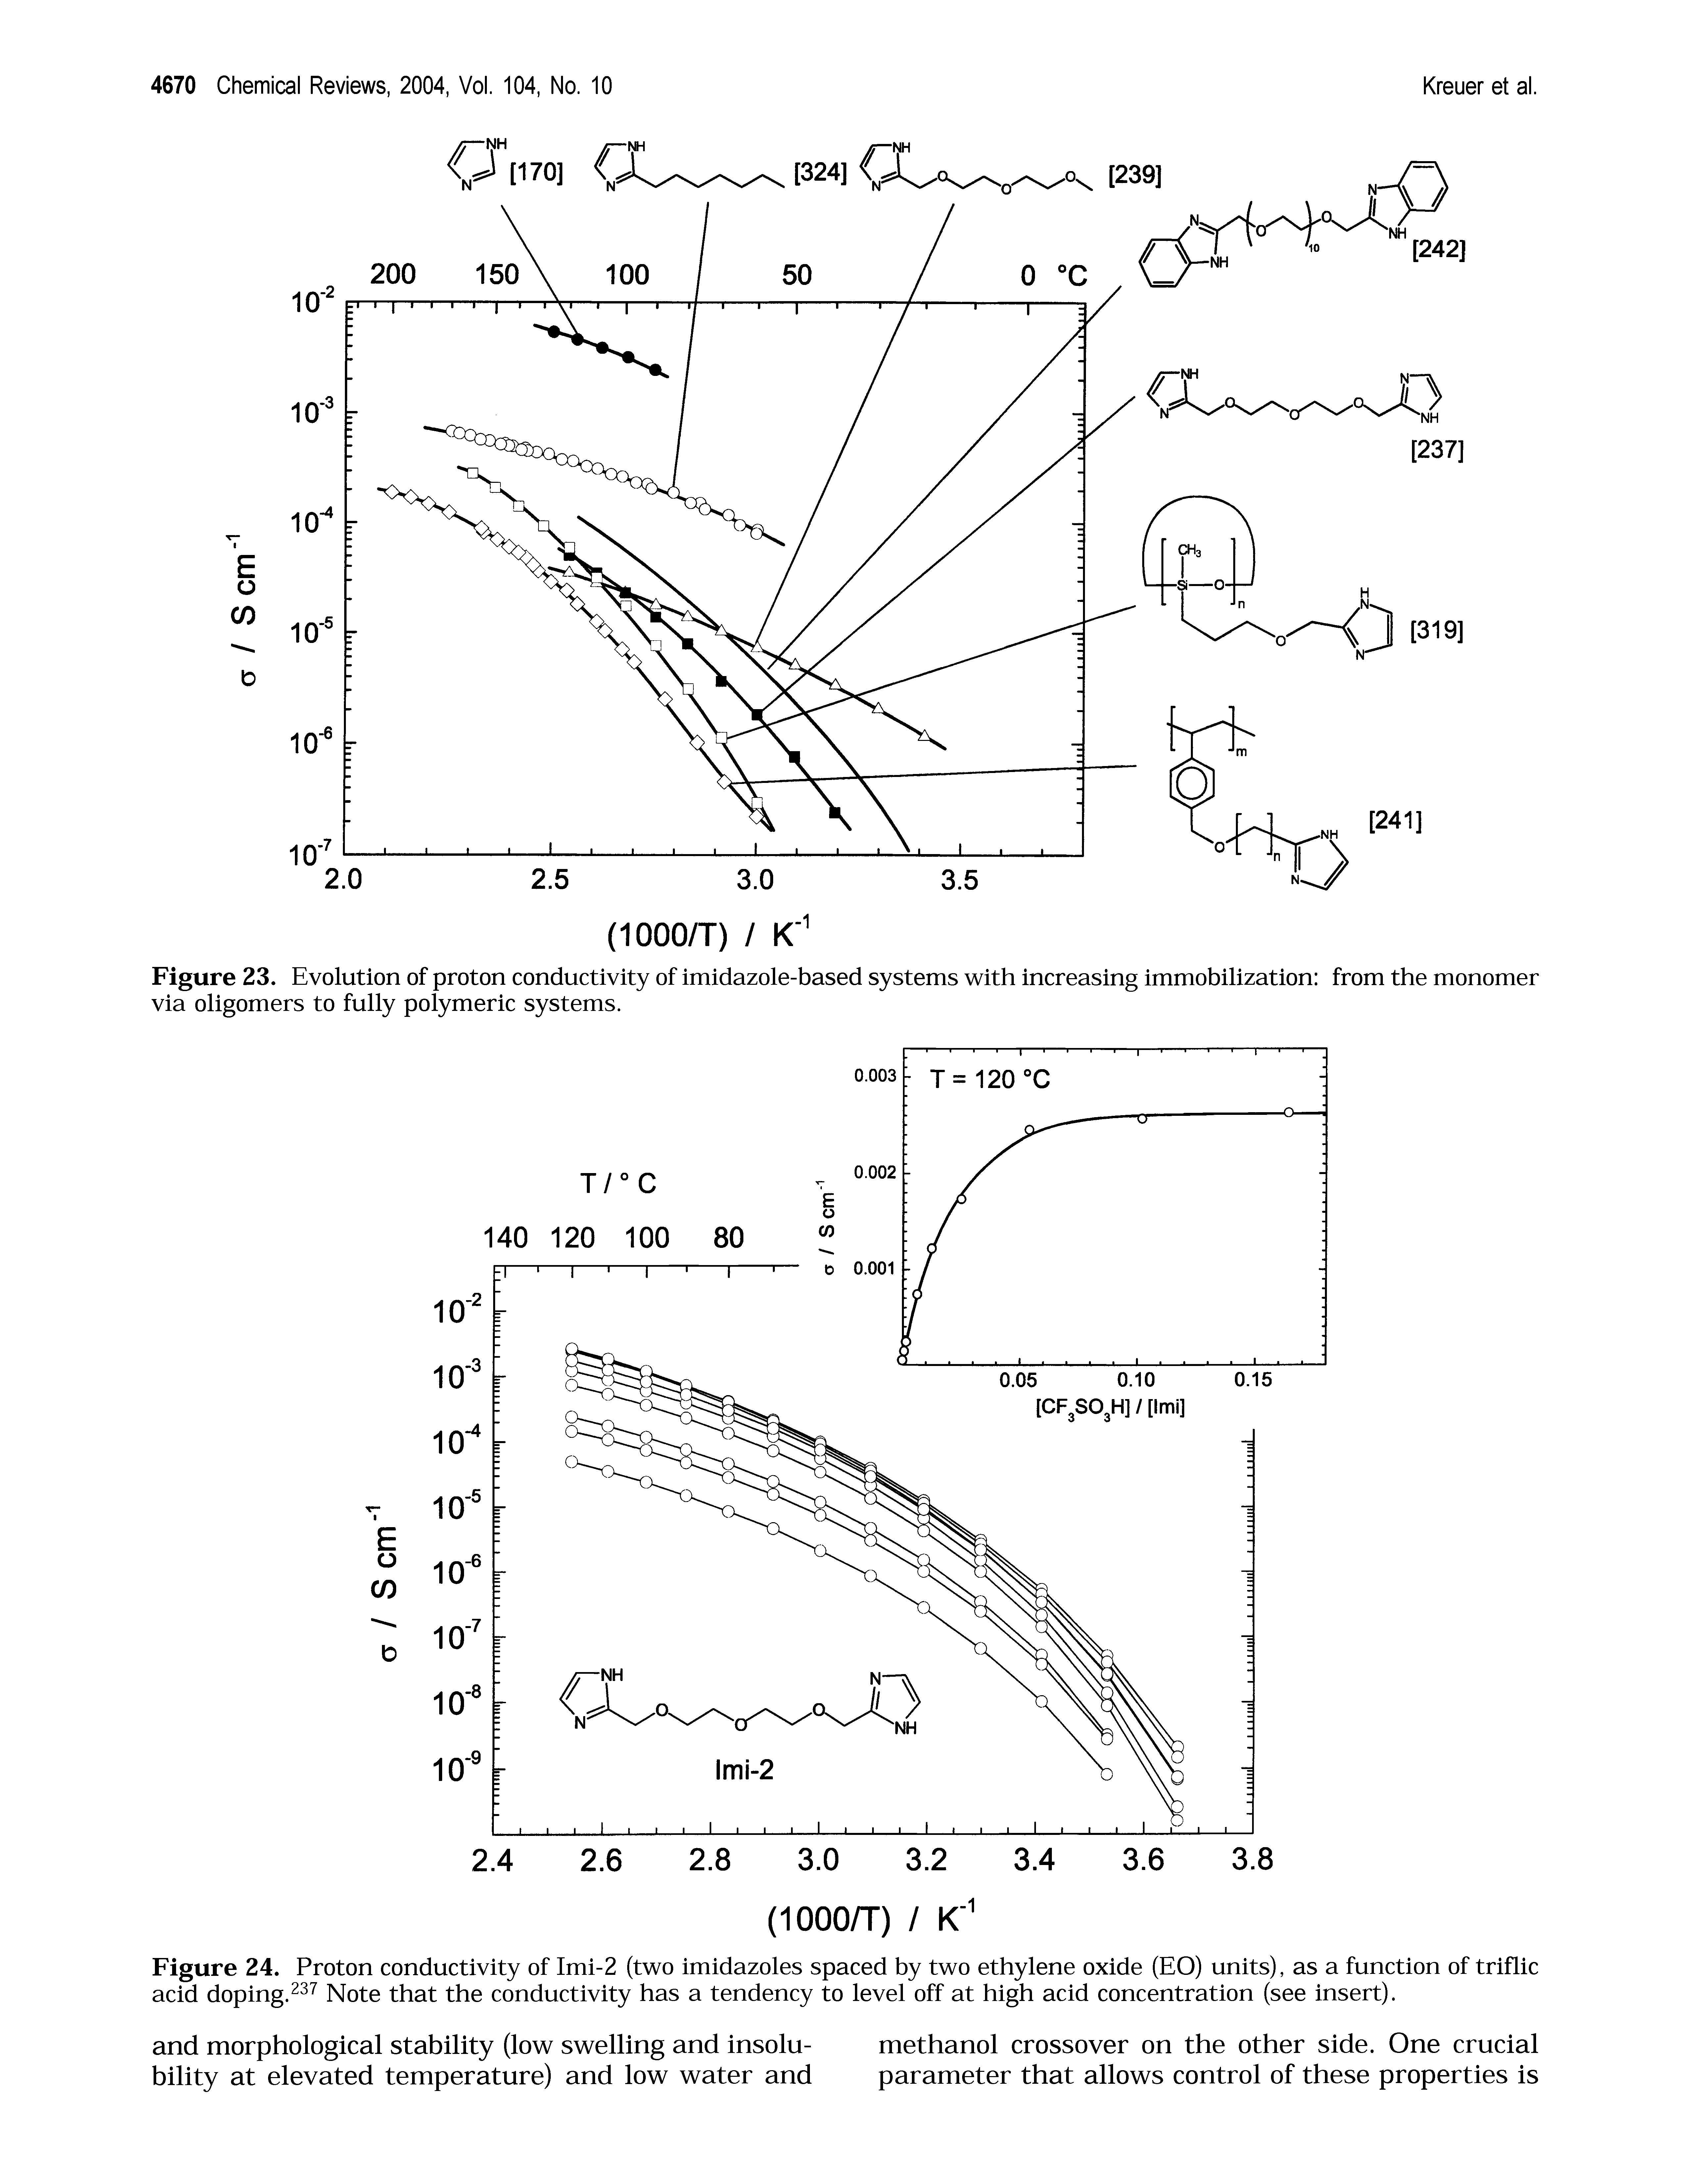 Figure 23. Evolution of proton conductivity of imidazole-based systems with increasing immobilization from the monomer via oligomers to fully polymeric systems.